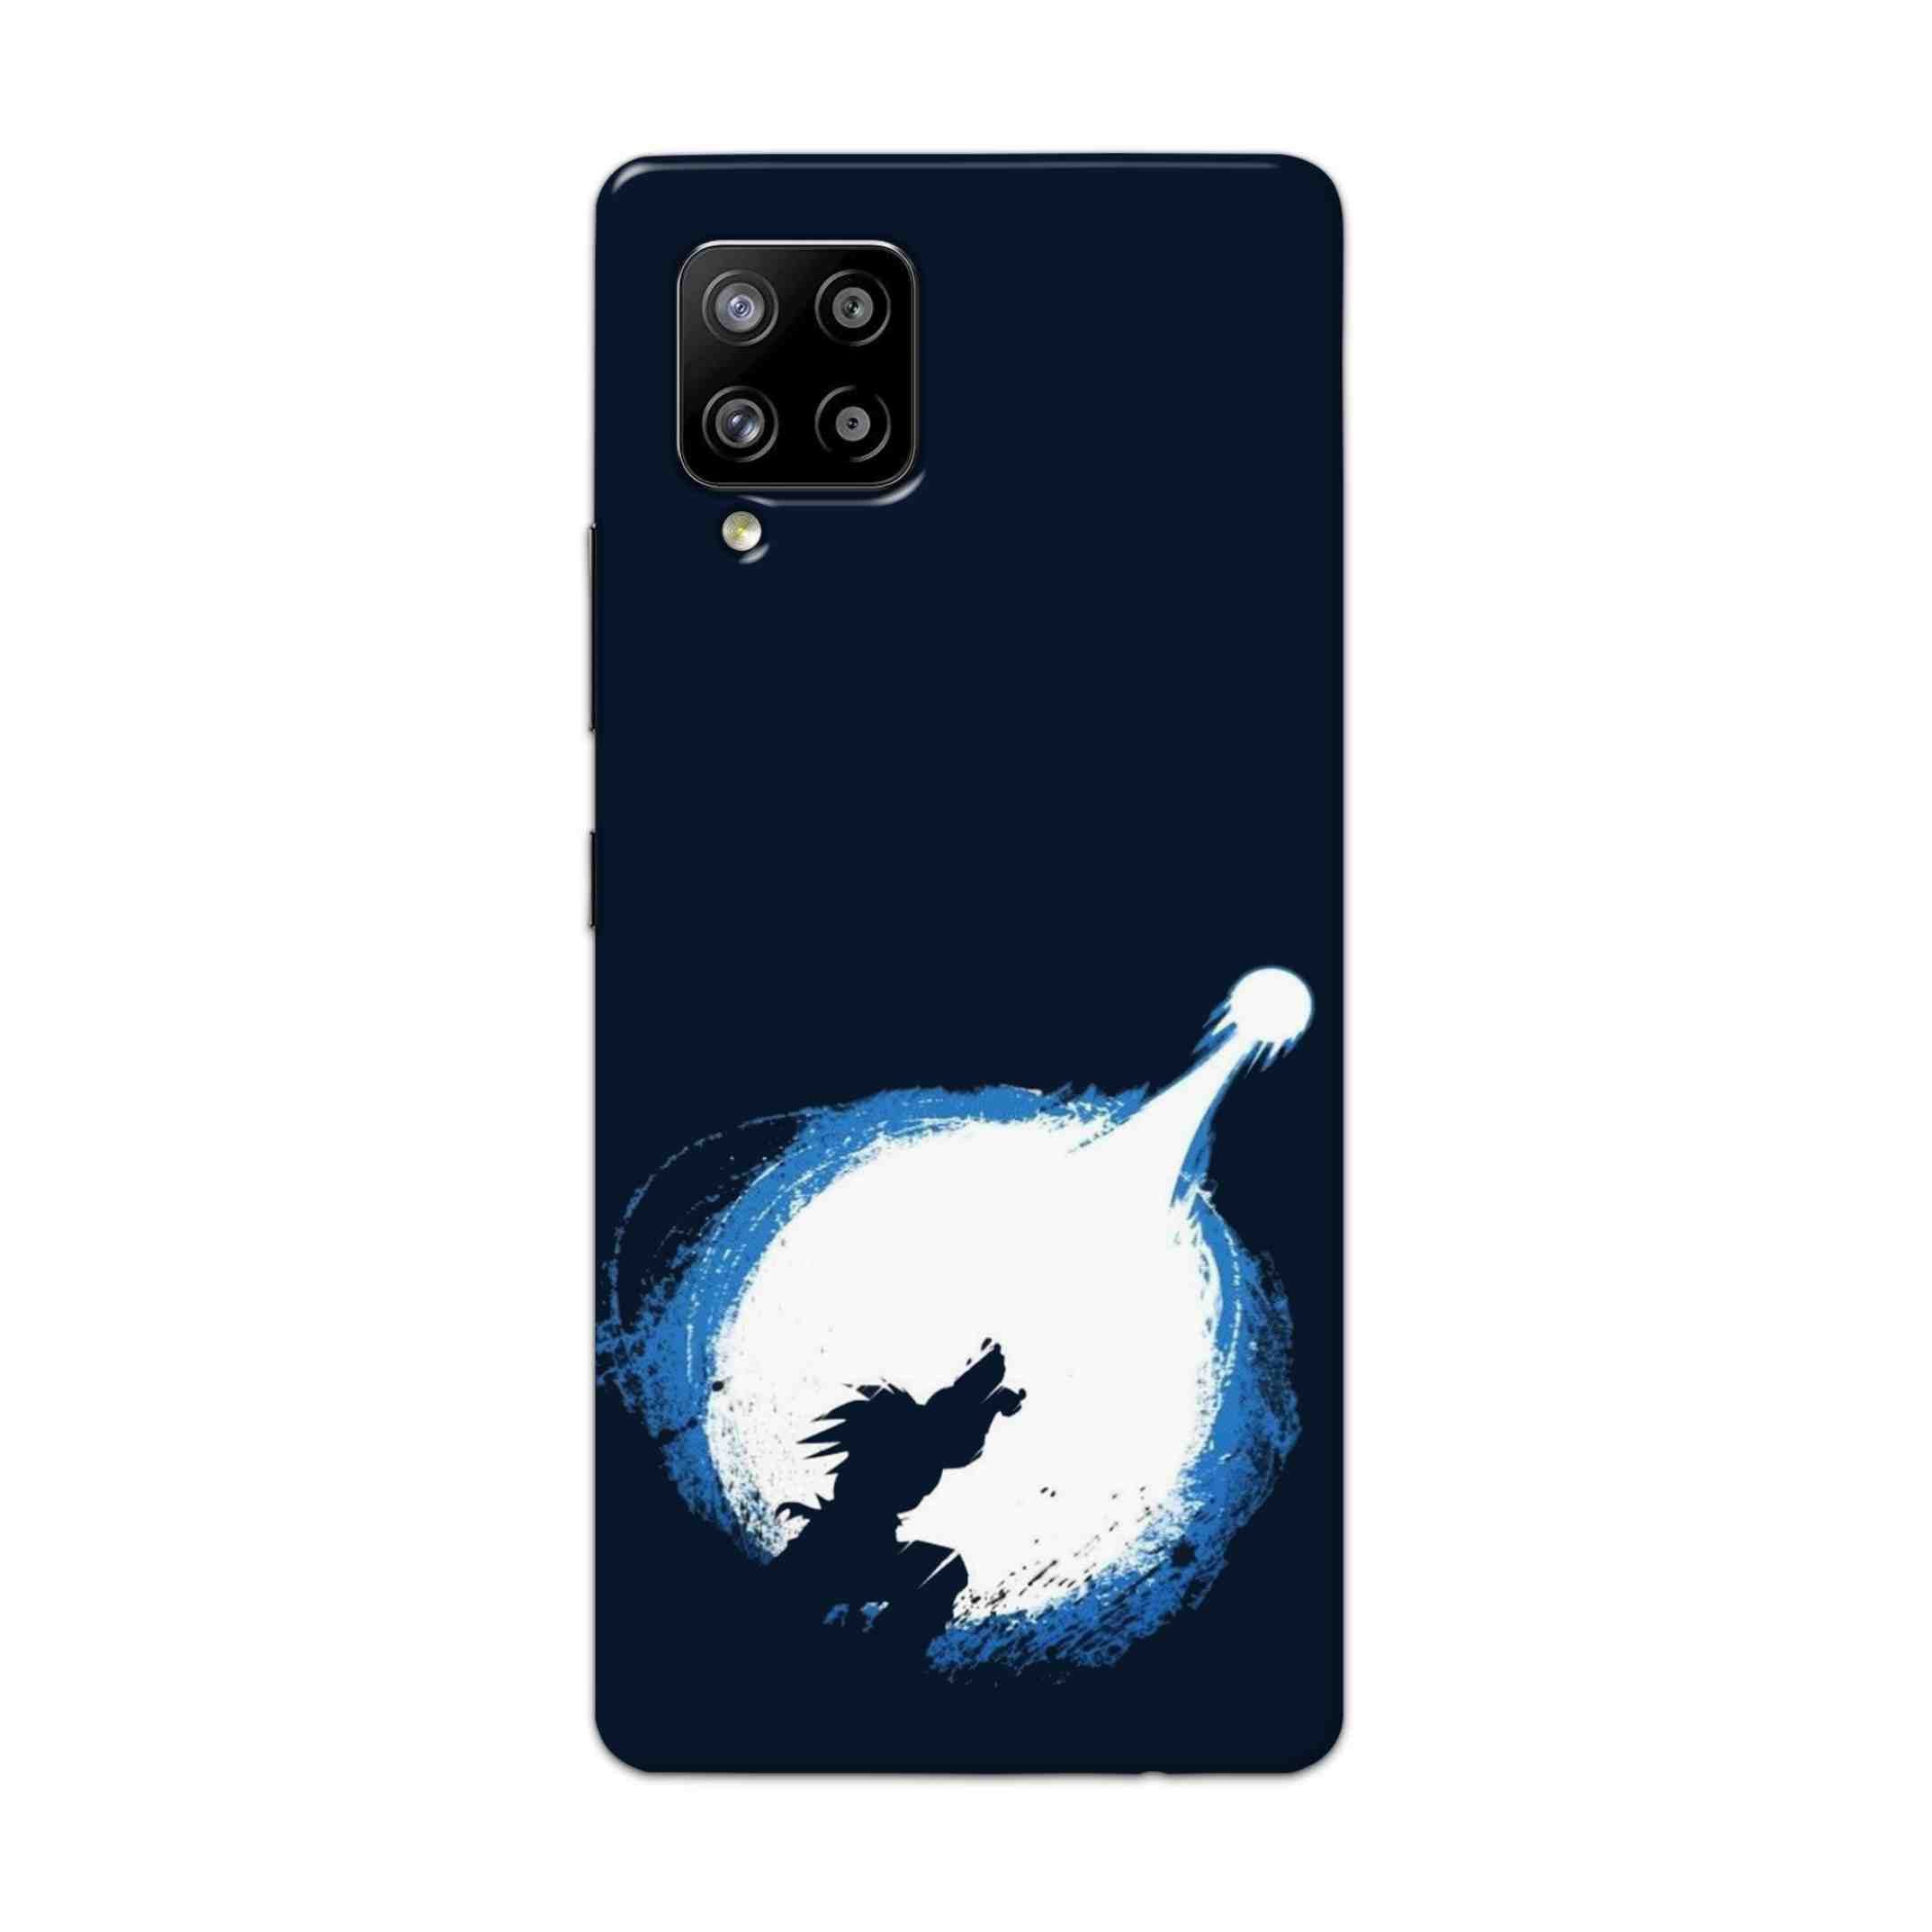 Buy Goku Power Hard Back Mobile Phone Case Cover For Samsung Galaxy M42 Online